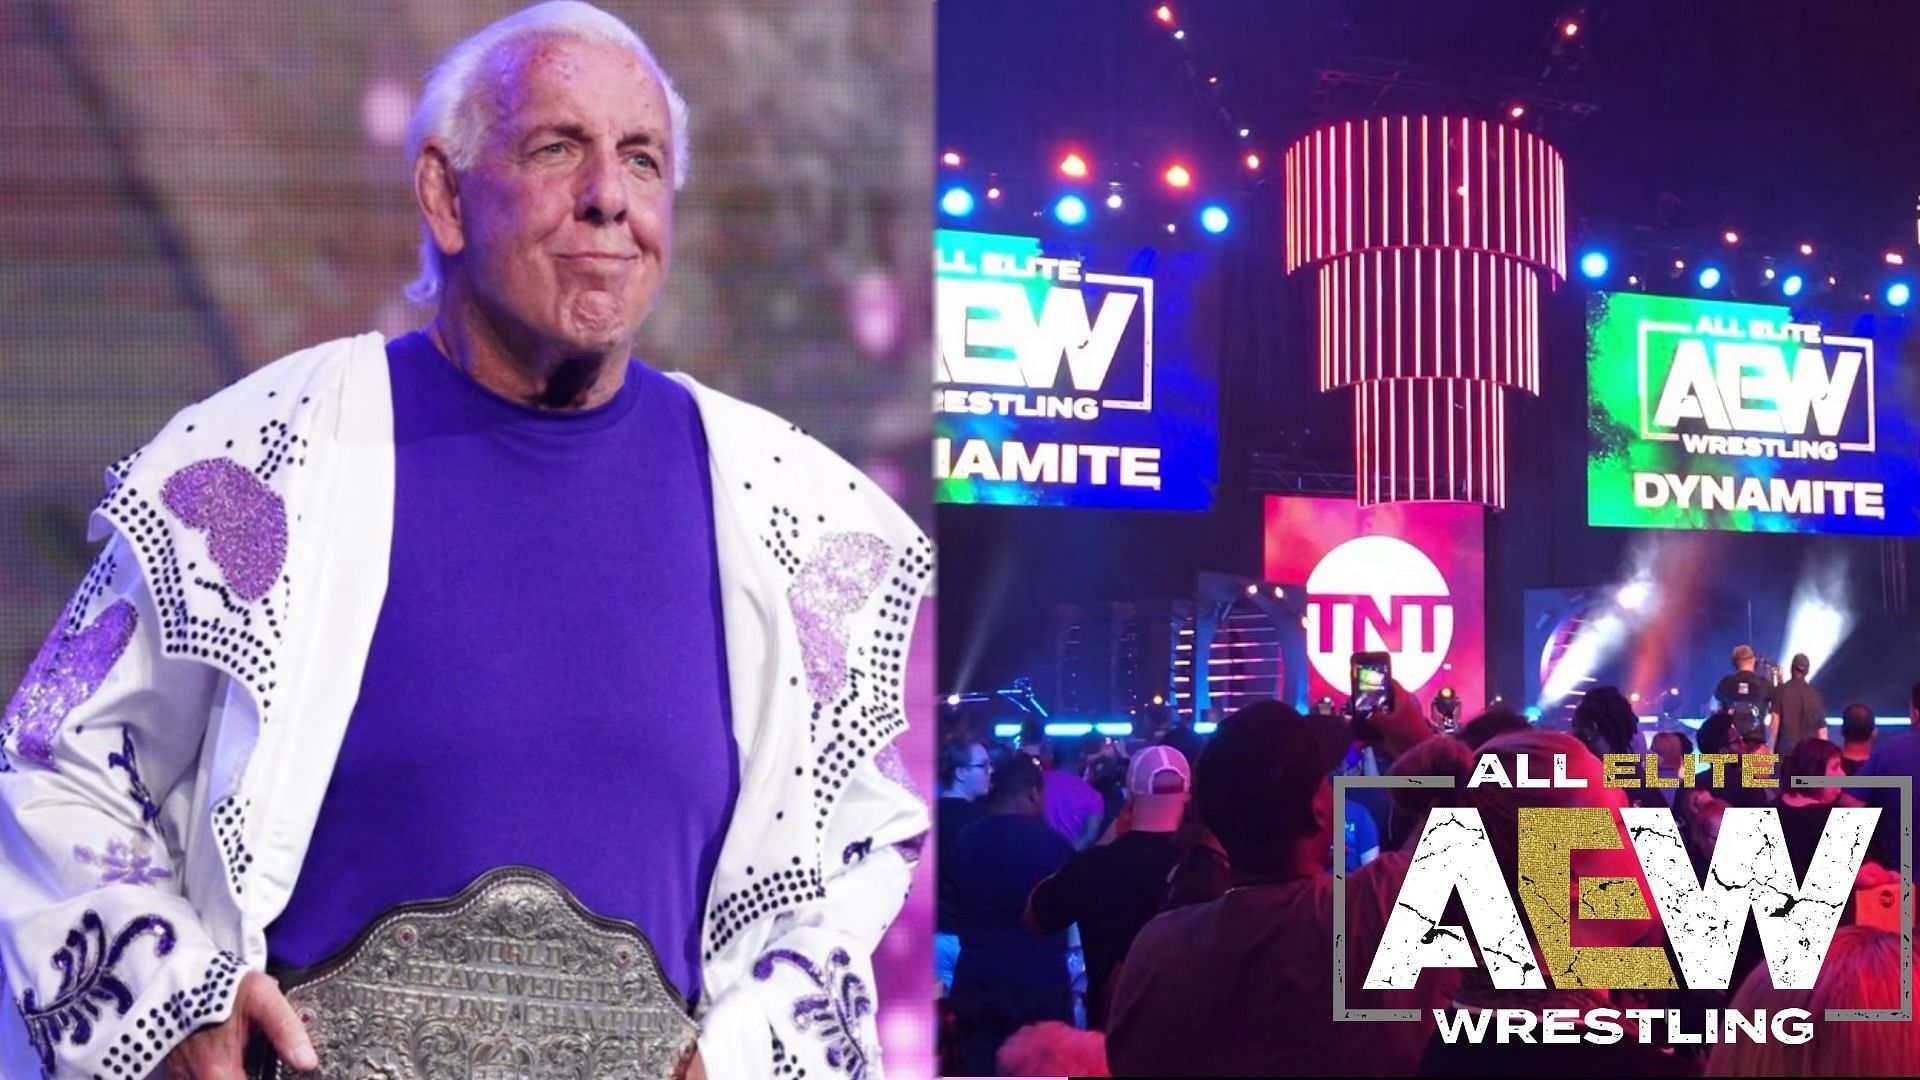 What does Ric Flair know about AEW that fans don